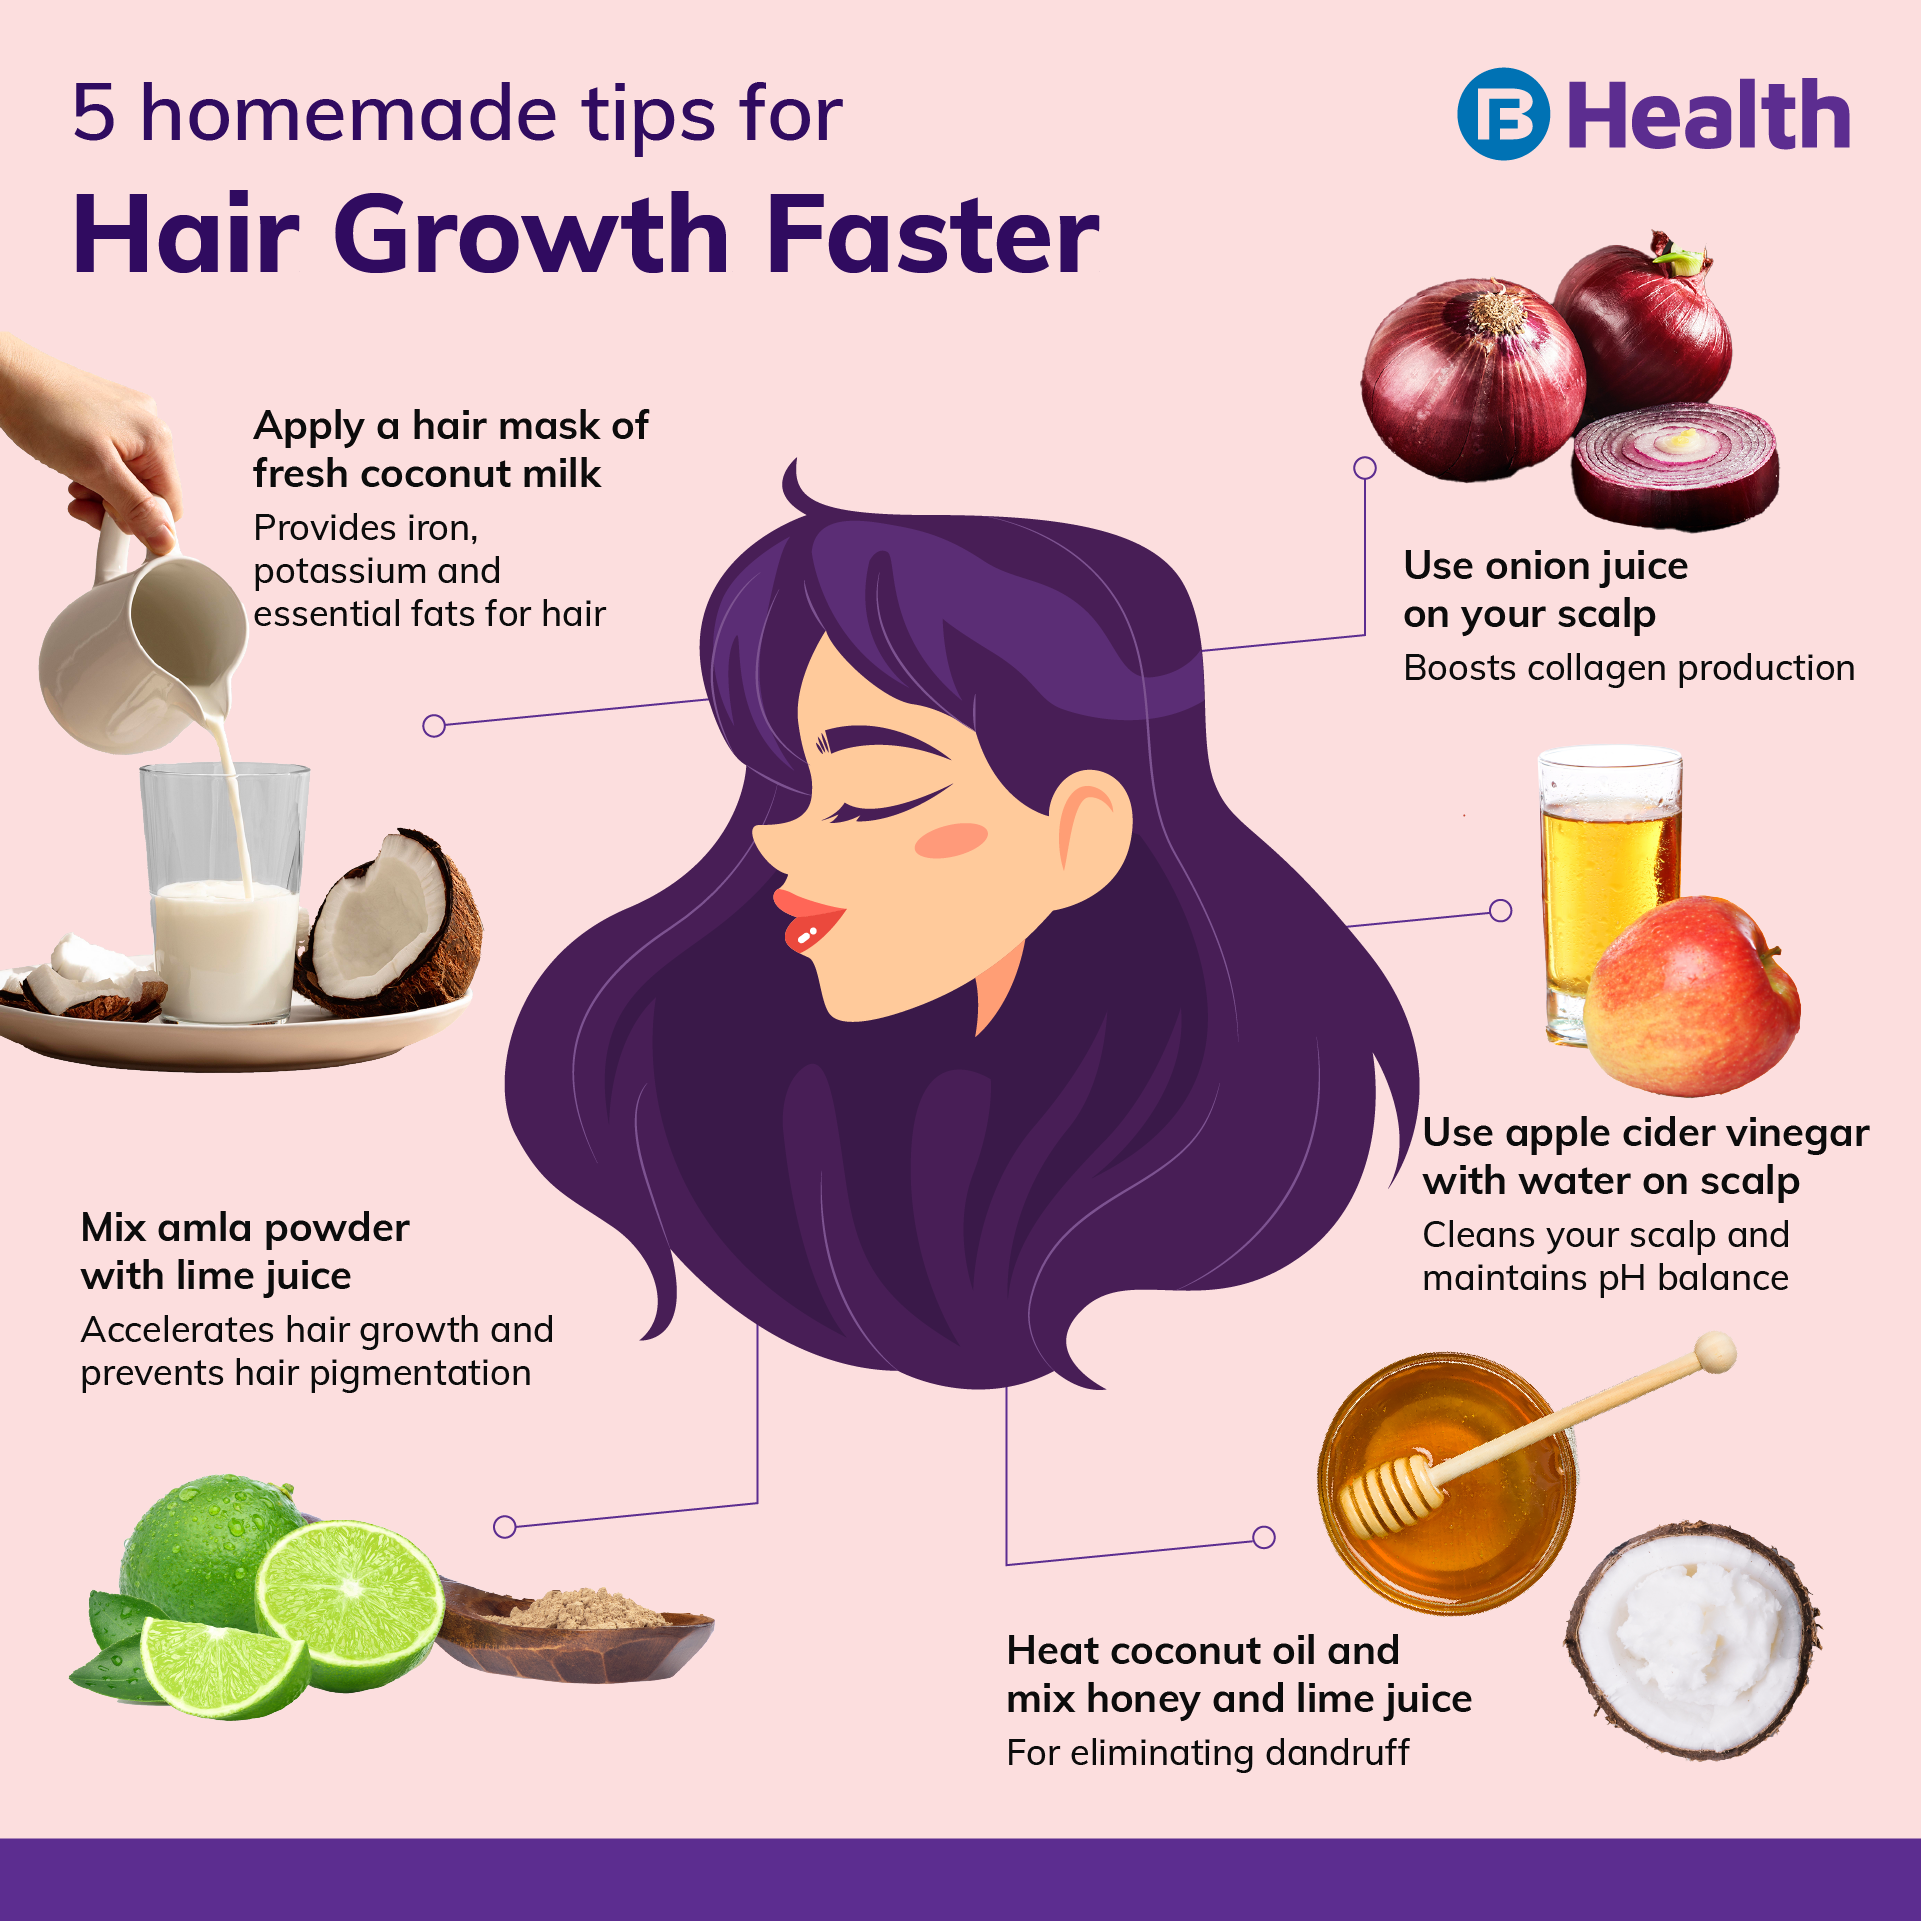 Grow your hair faster with these simple hair growth tips